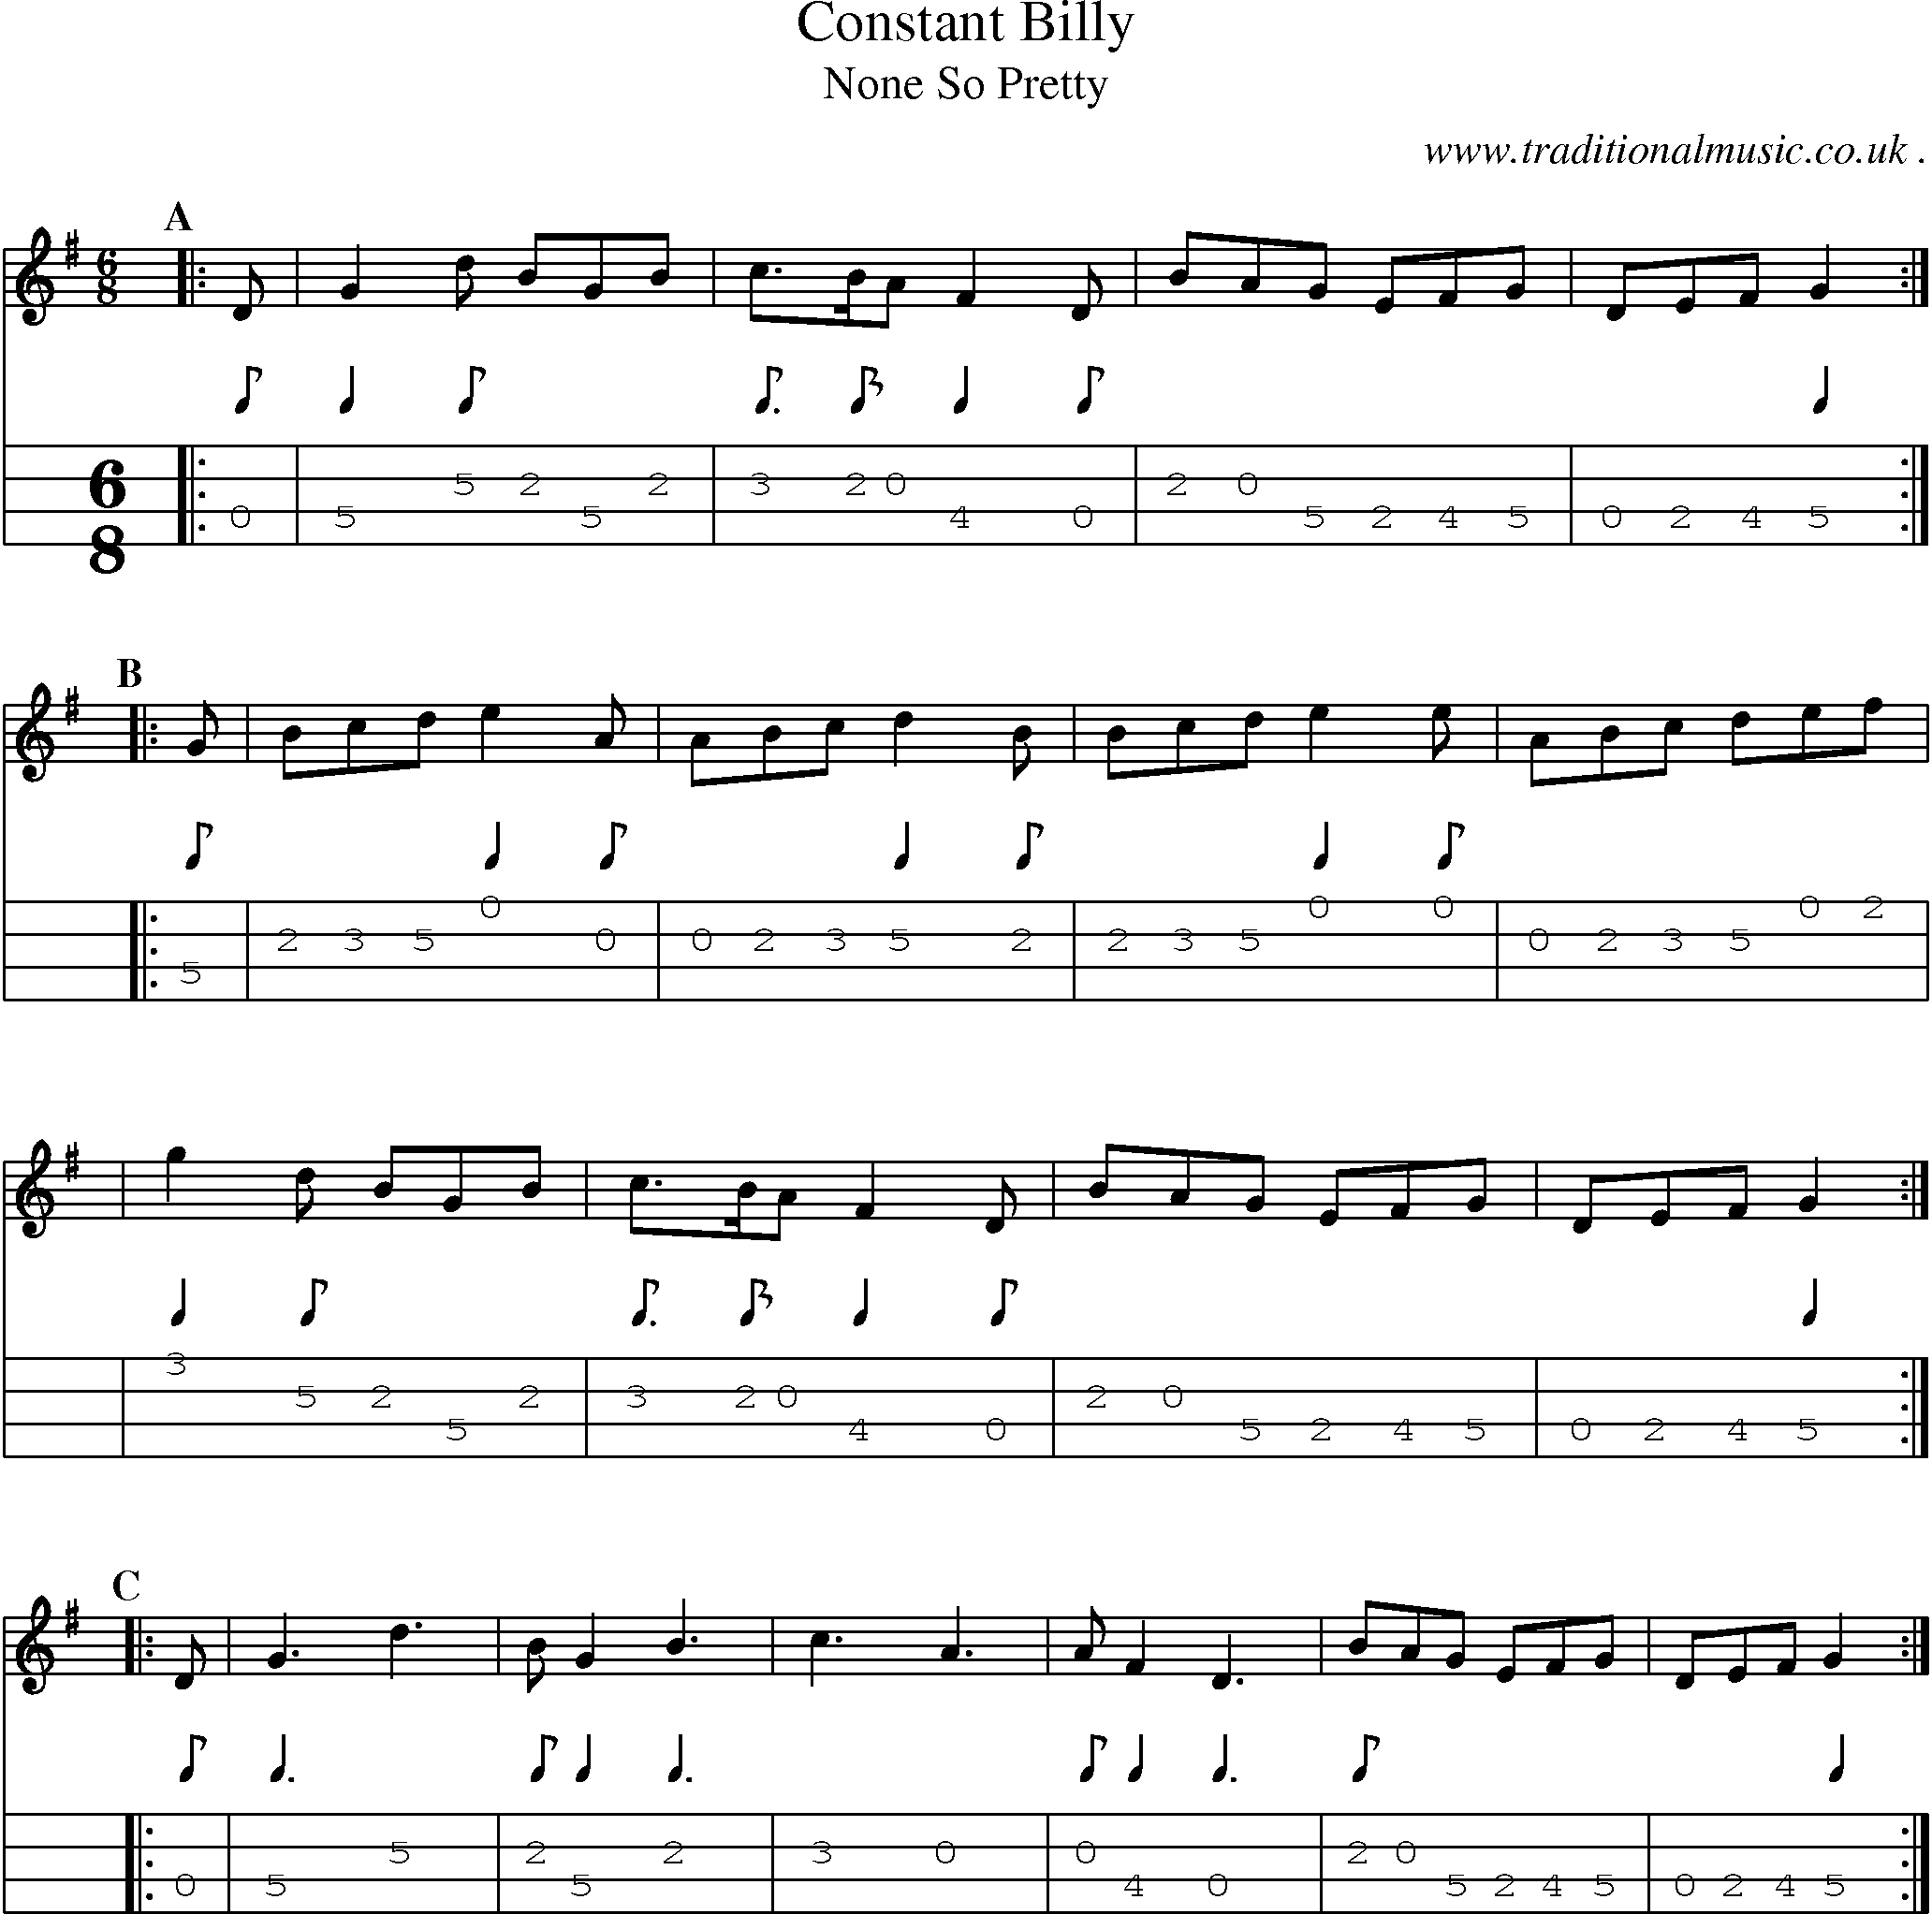 Sheet-music  score, Chords and Mandolin Tabs for Constant Billy